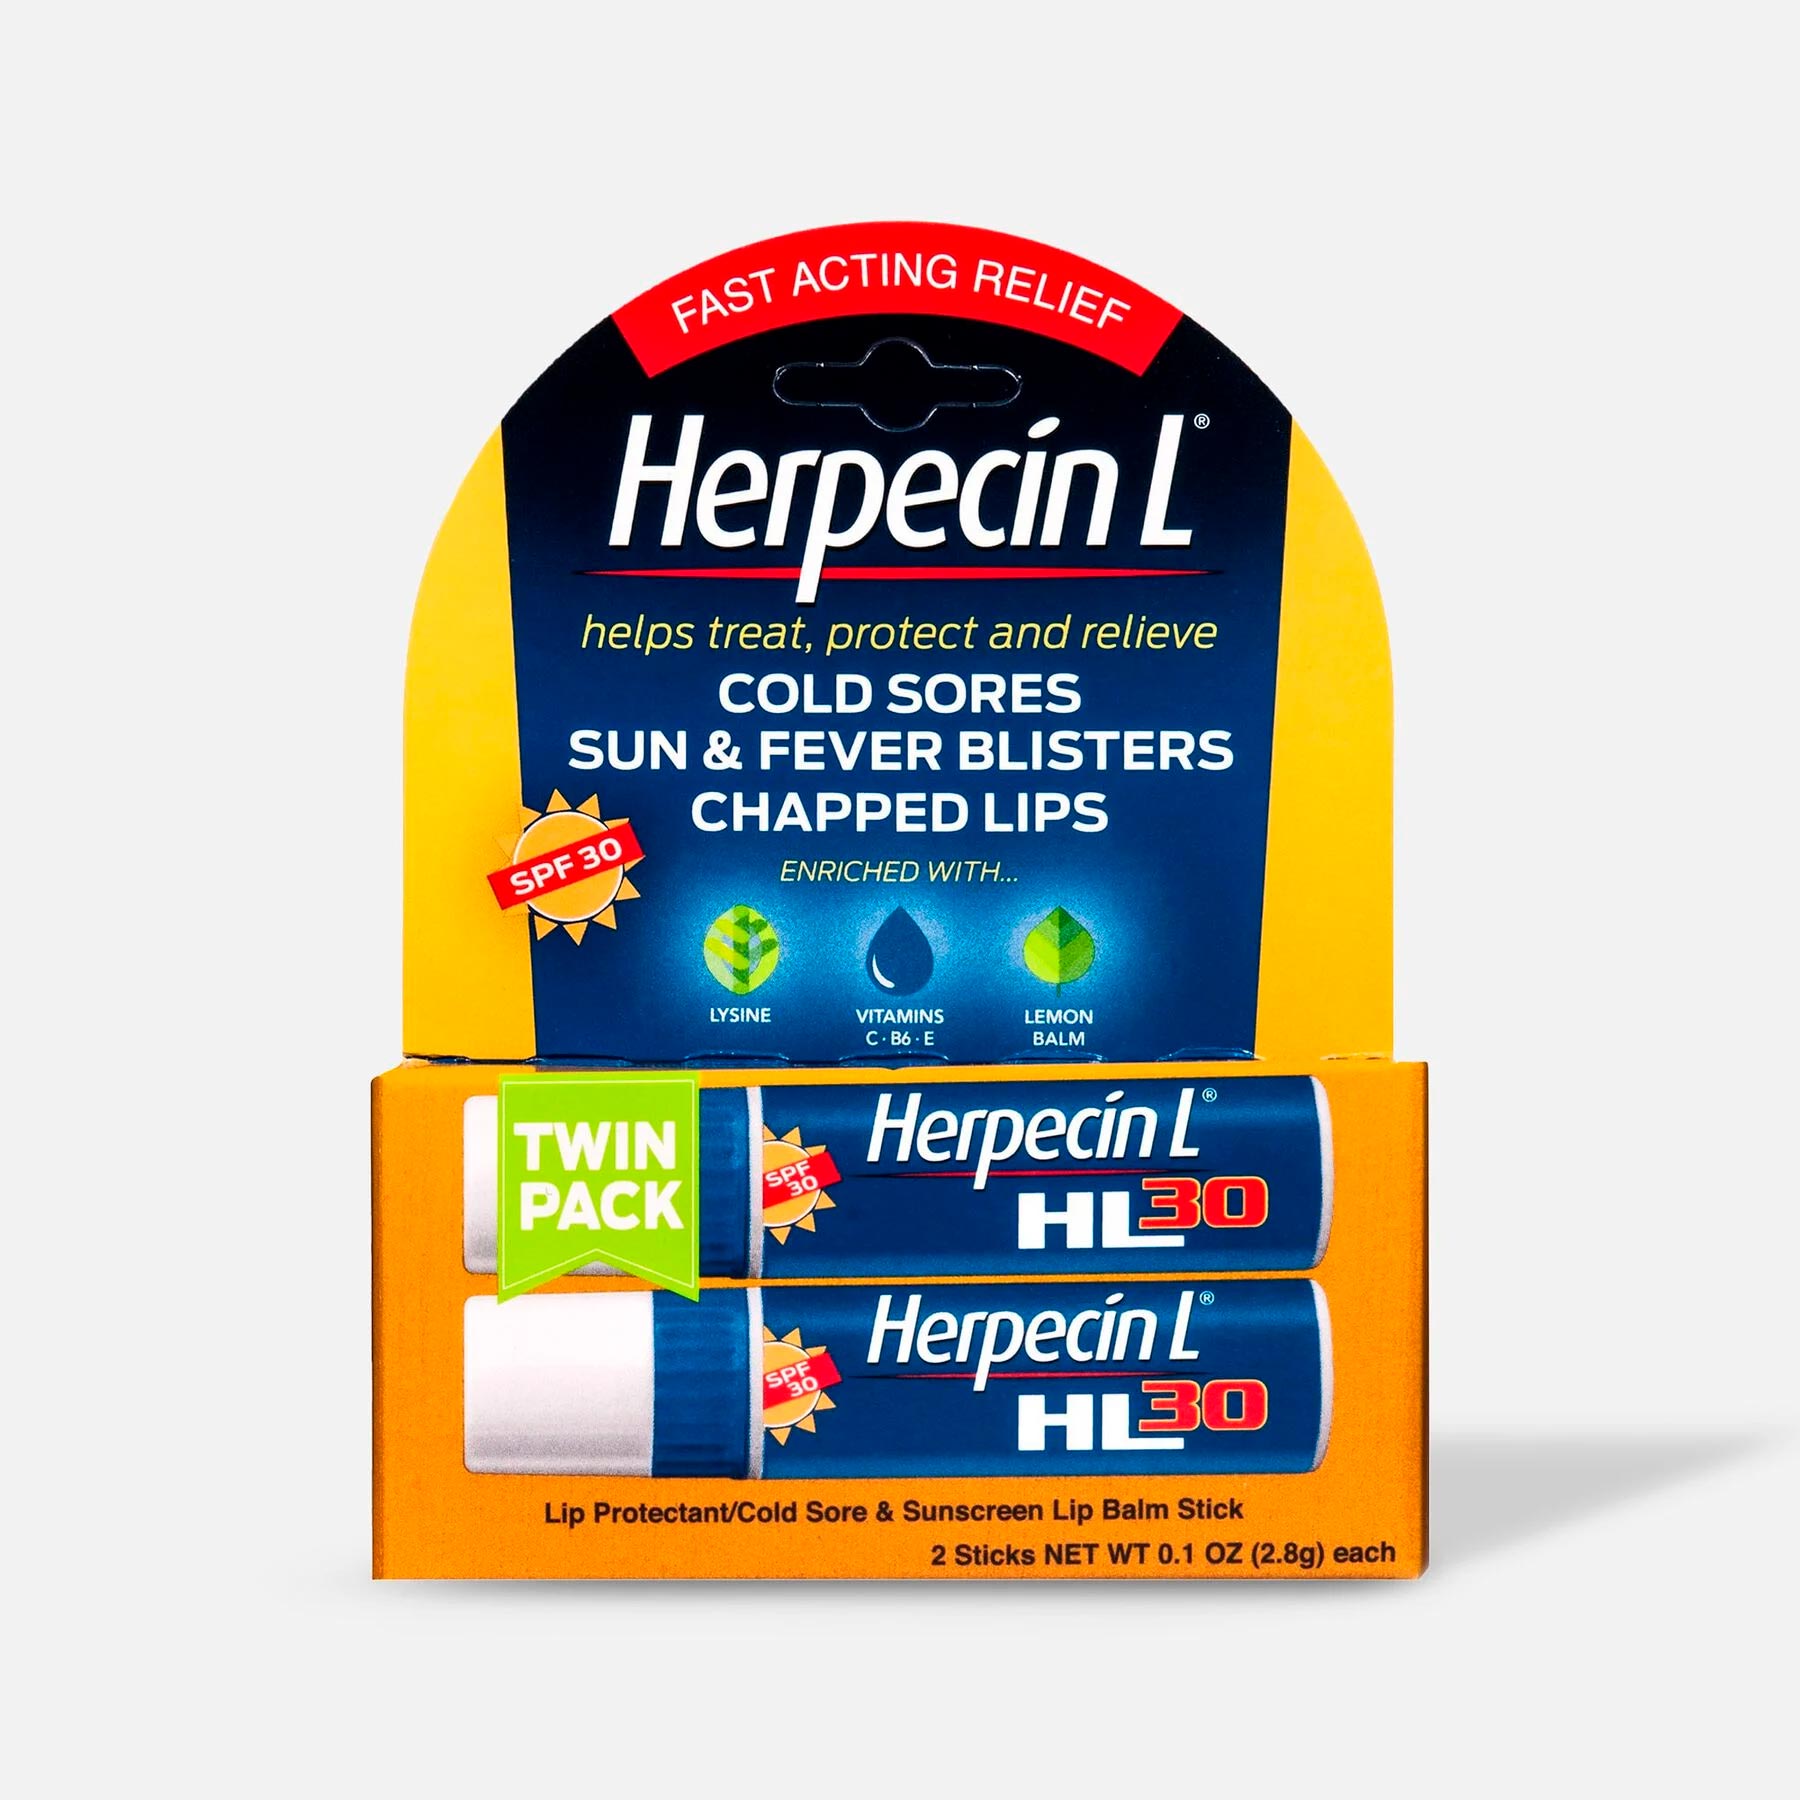 HSA Eligible  Herpecin-L Lip Protectant Cold Sore & Sunscreen Lip Balm,  Twin-Pack